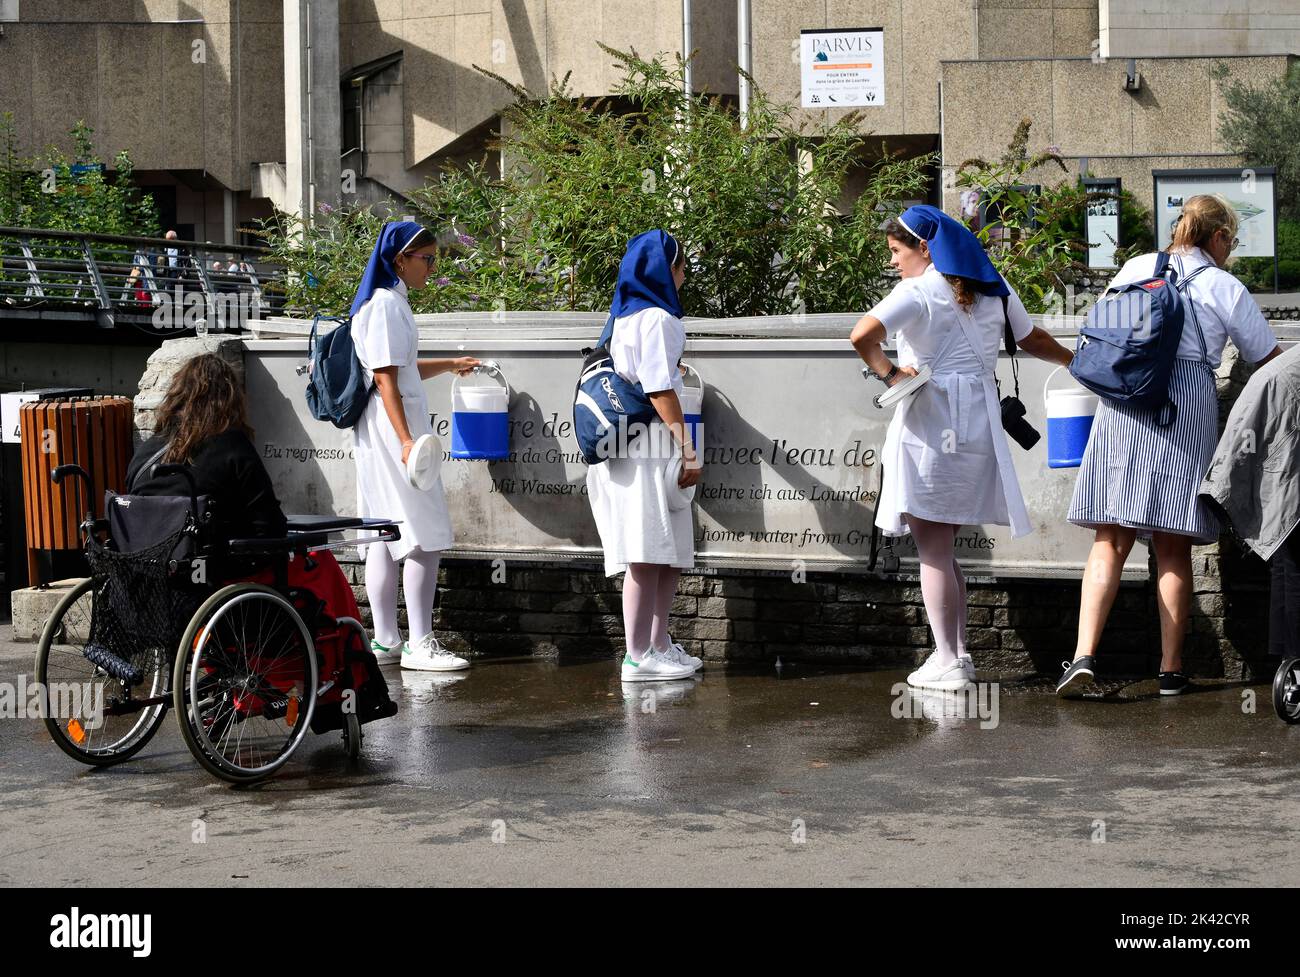 Lourdes, Hautes-Pyrénées, France. Christian pilgrims collecting Lourdes water that flows from the Grotto of Massabielle in the Sanctuary of Our Lady o Stock Photo